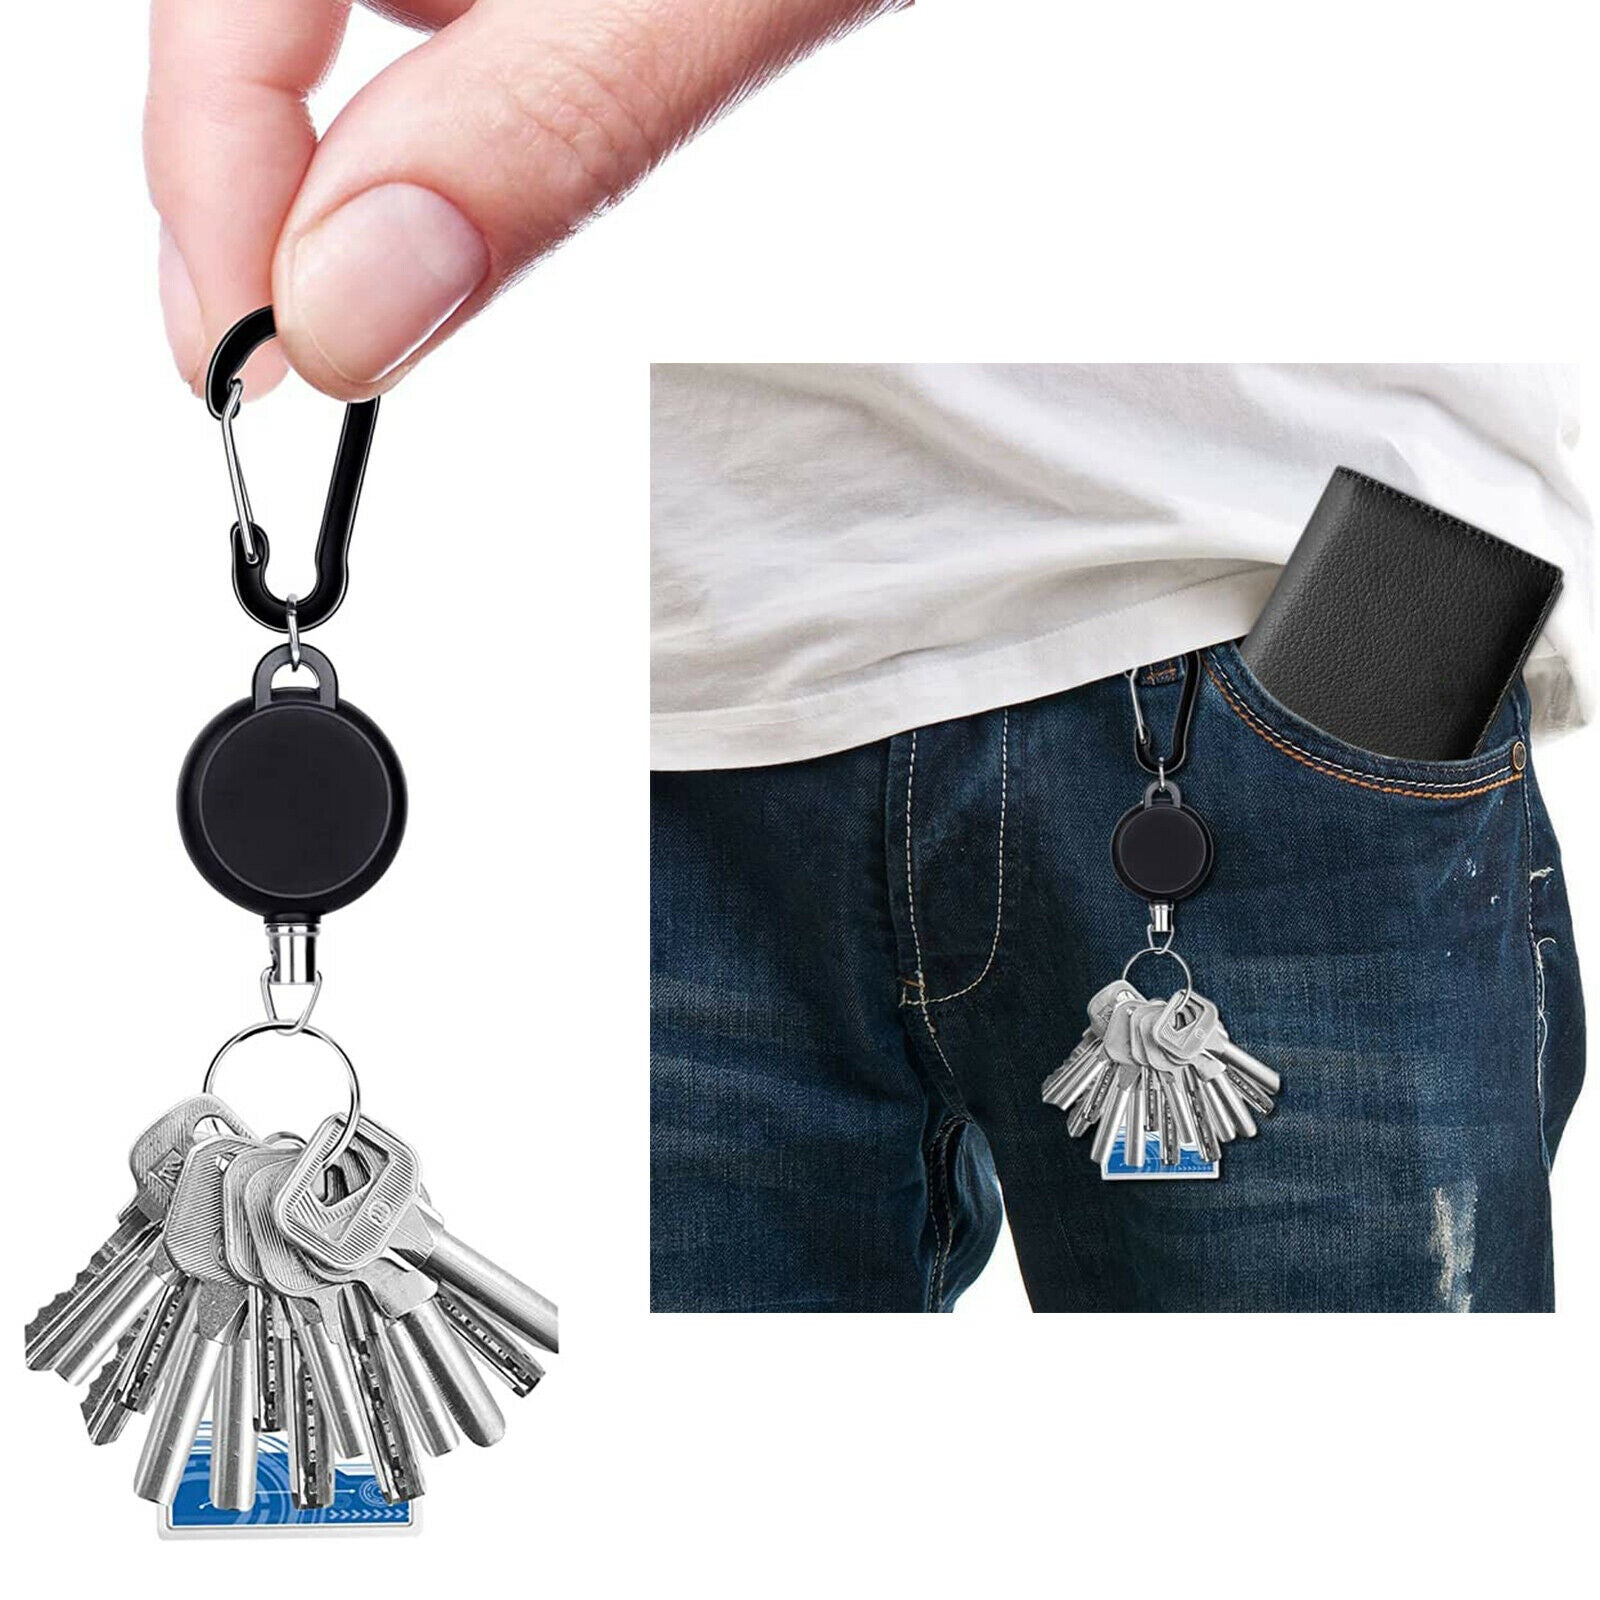 5 Pieces Retractable Key Chain Extendable Keychain Key Ring Name Cards Badge